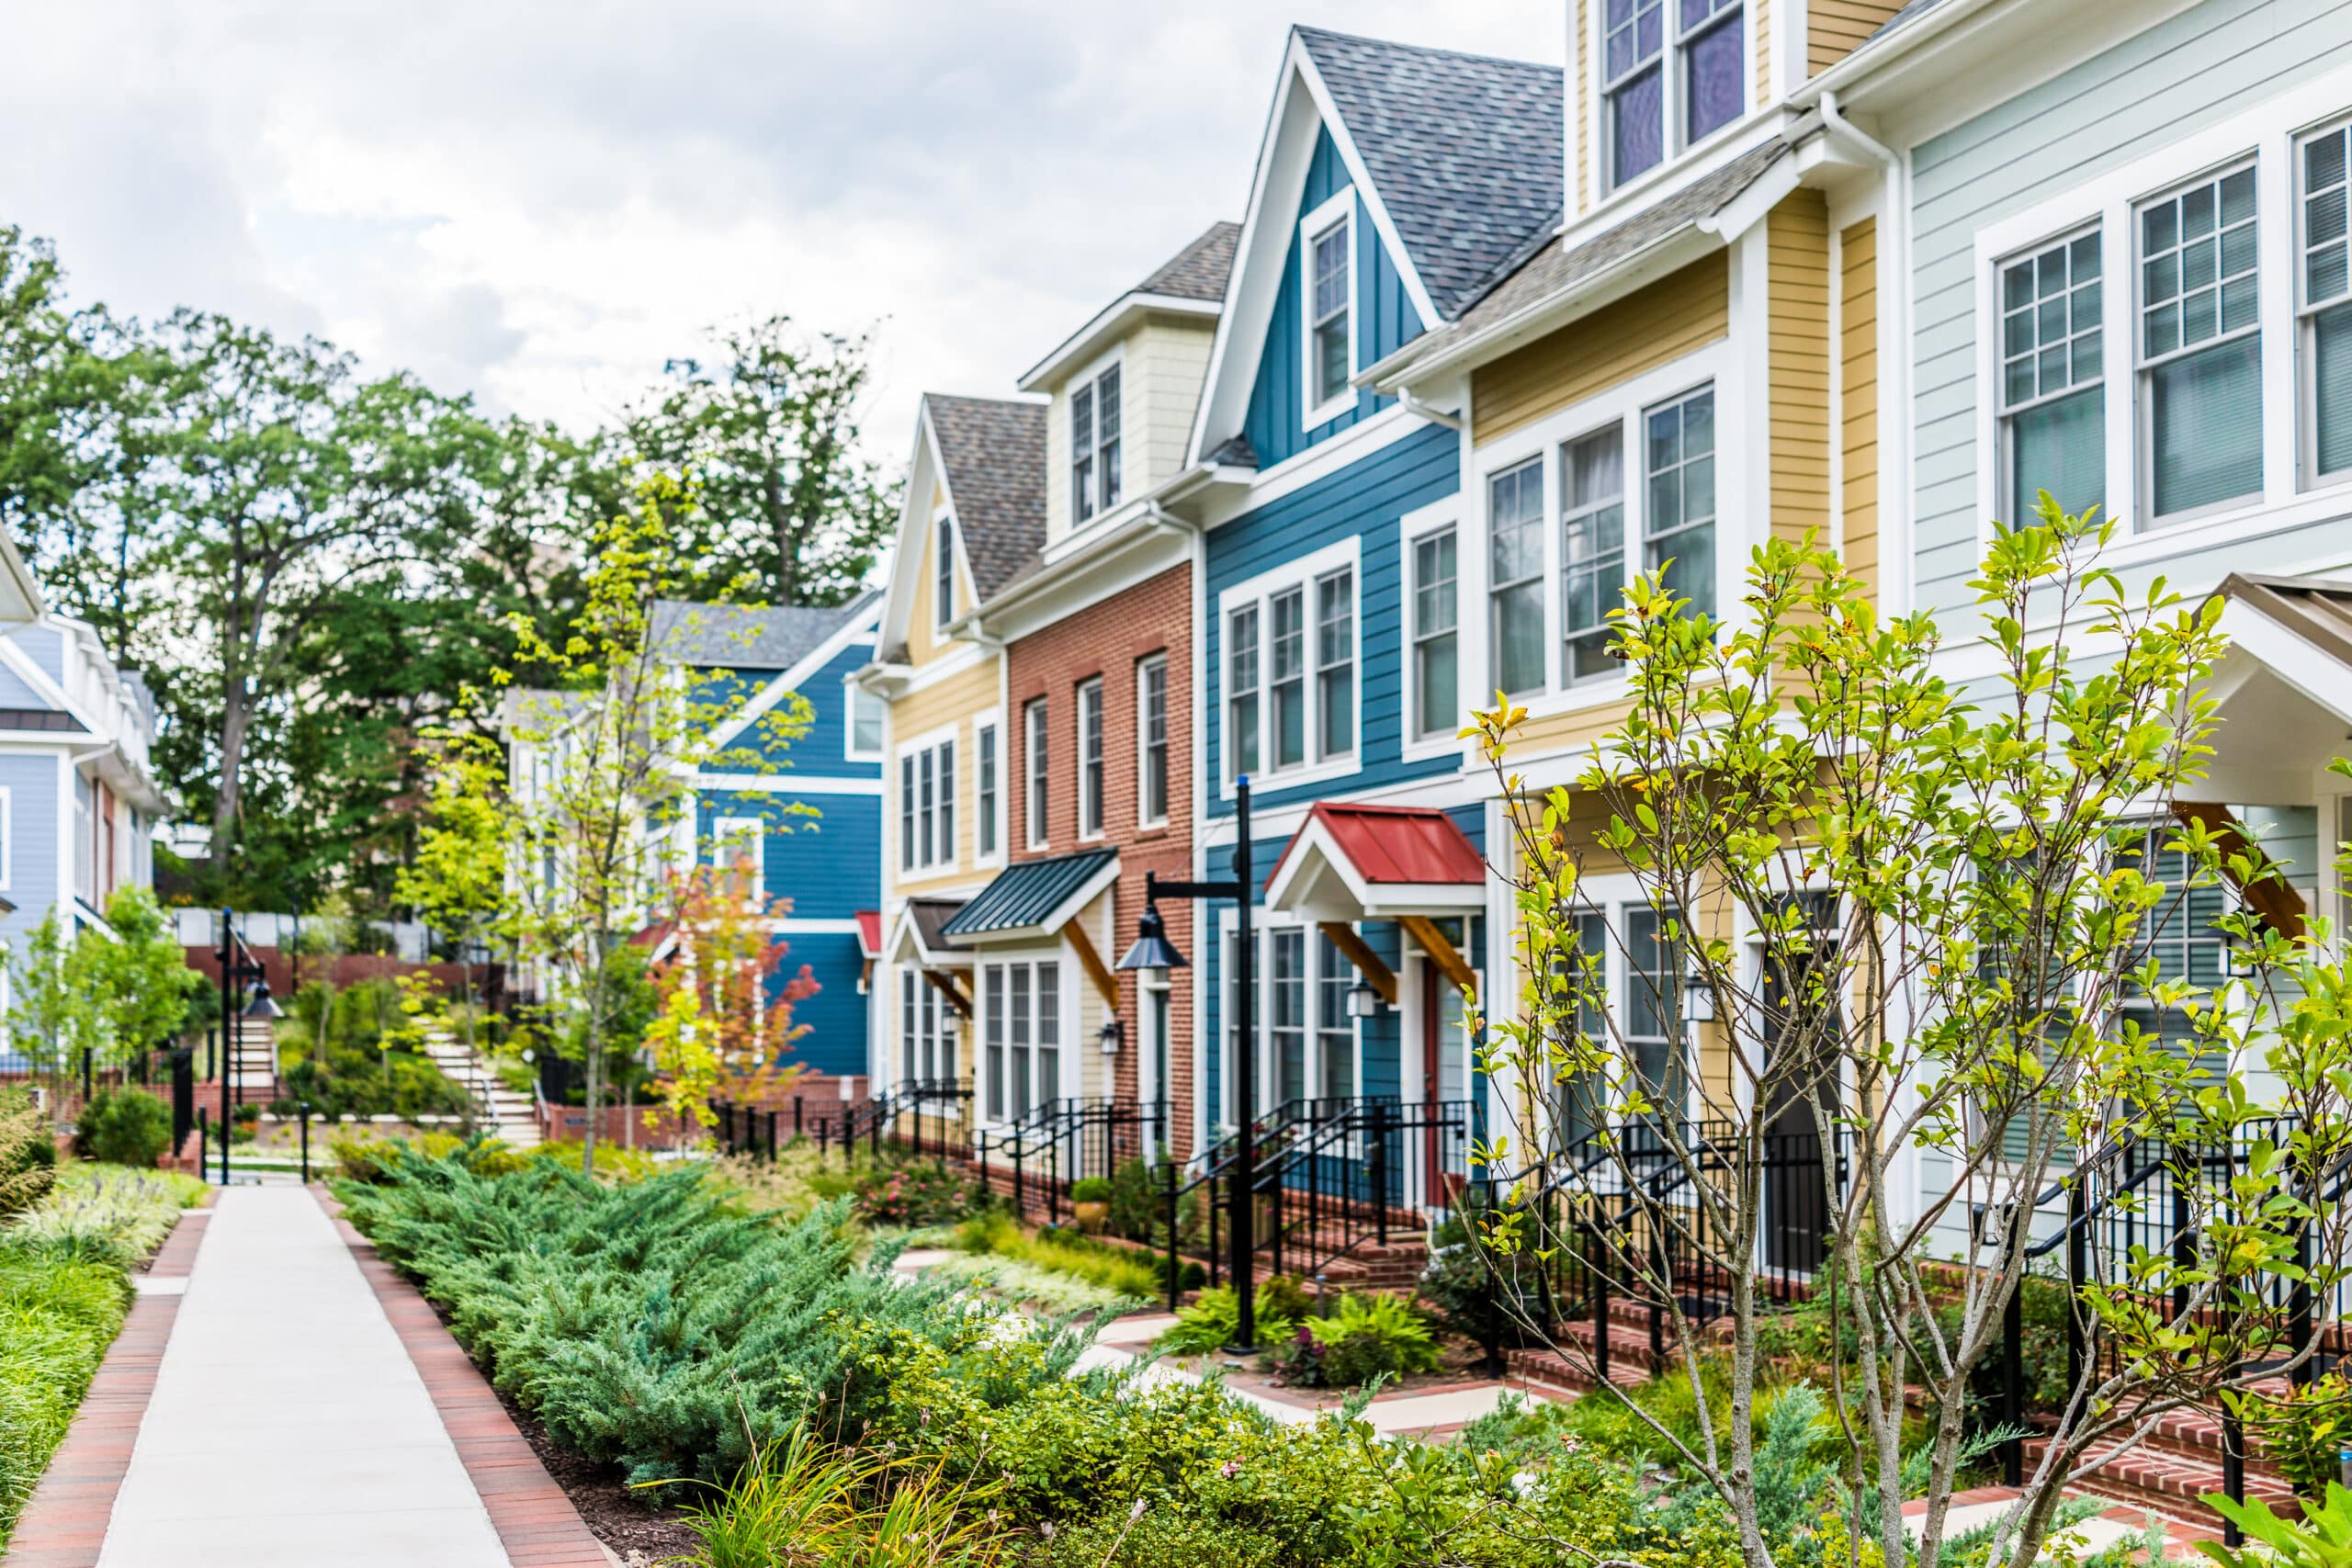 A row of brightly colored houses.